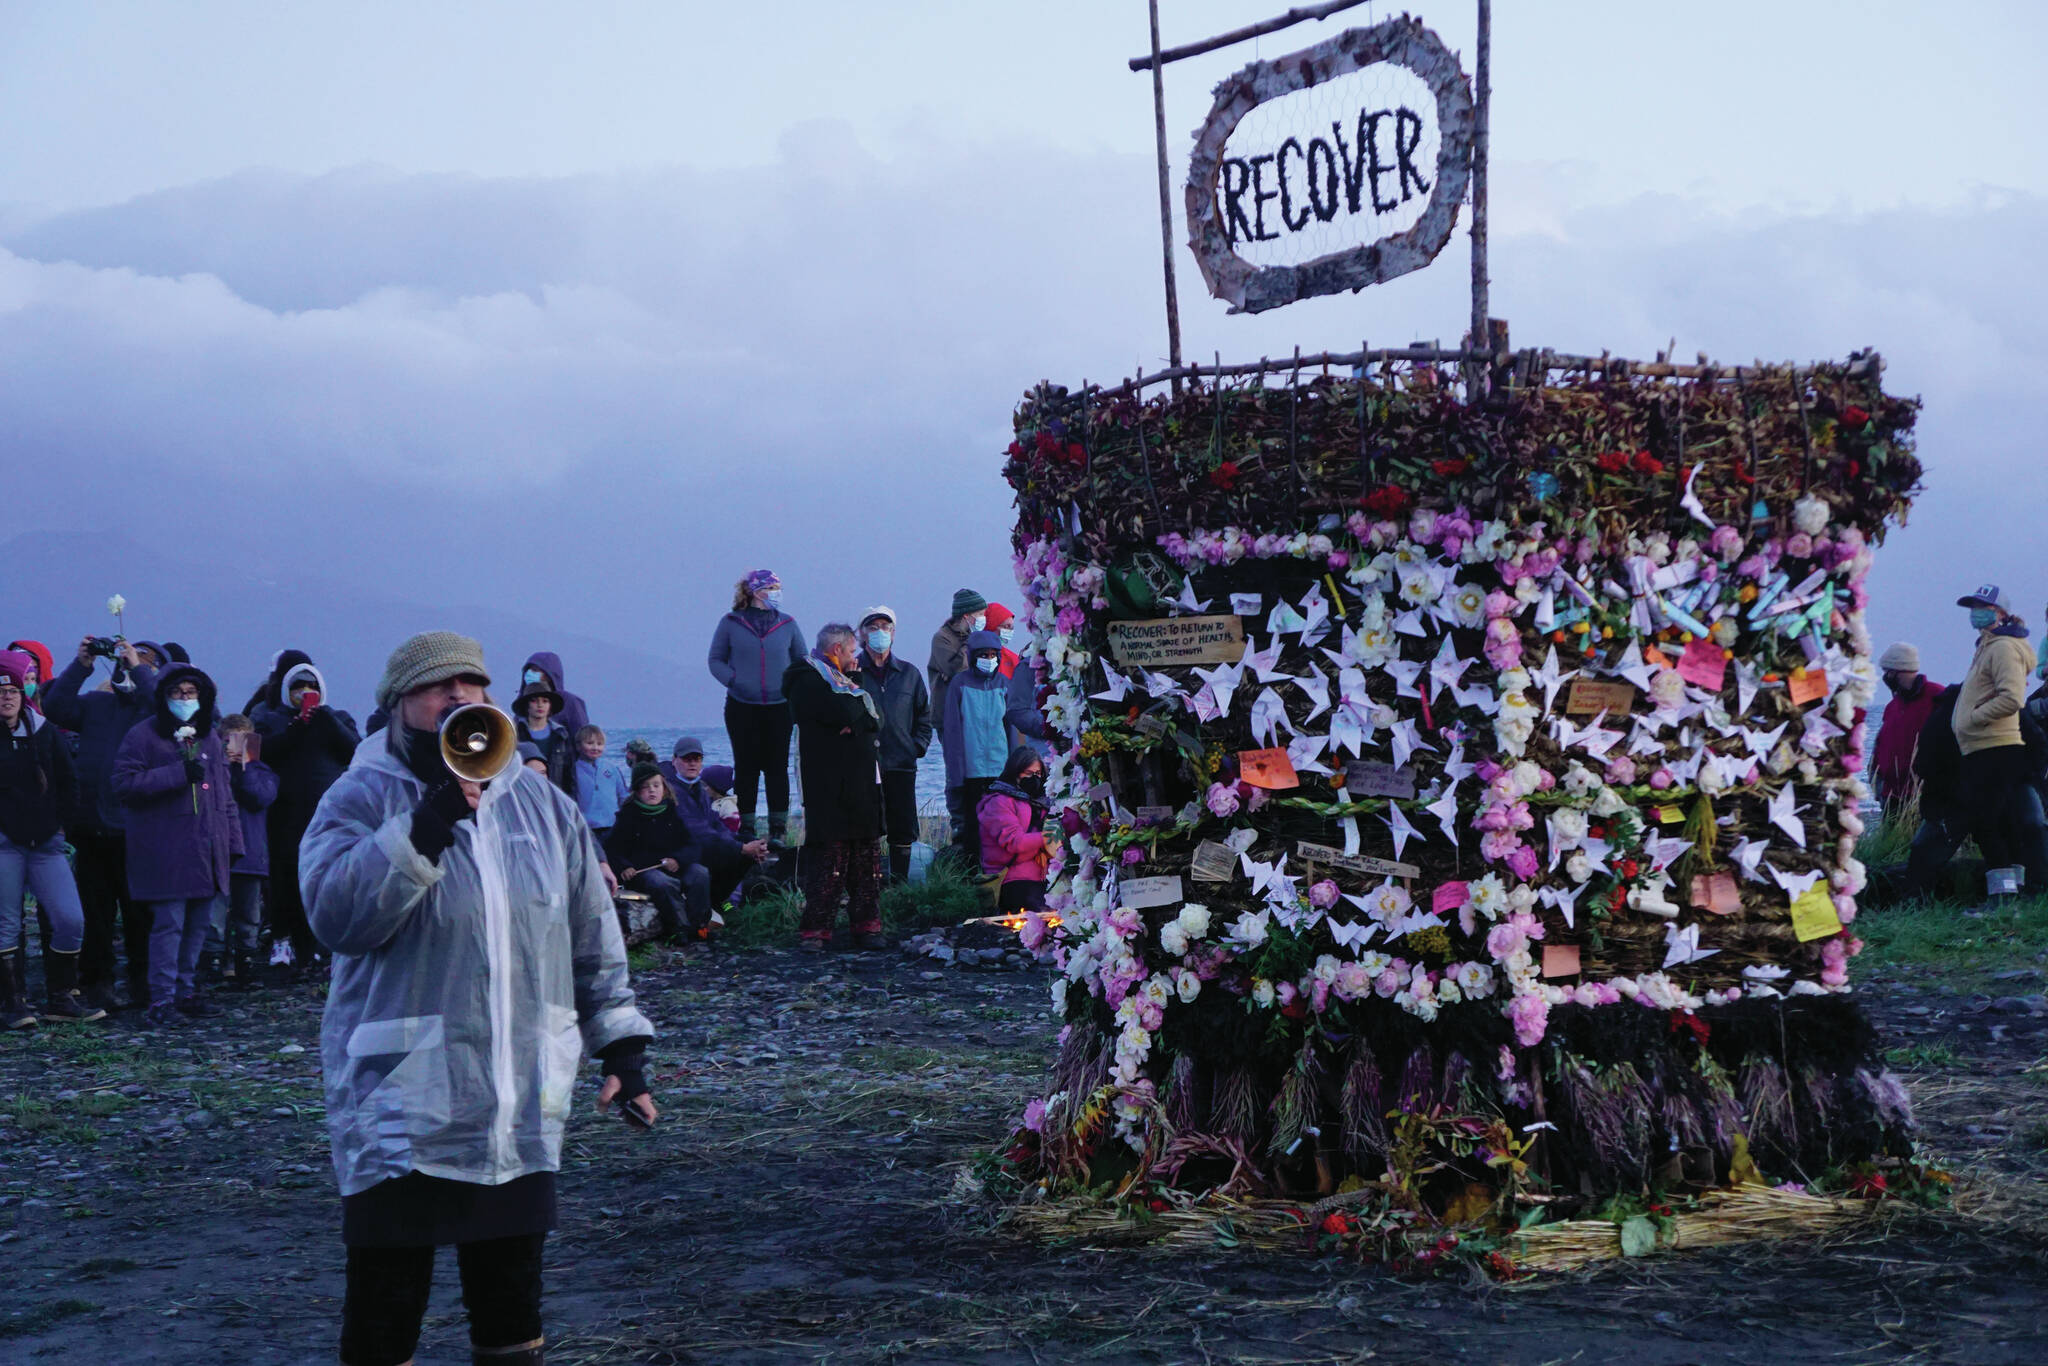 Mavis Muller, the organizer of Recover, the 18th annual Burning Basket, speaks before the basket was ignited on Sunday, Sept. 12, 2021, at Mariner Park on the Homer Spit in Homer, Alaska.
"We recover faster together," Muller said of the basket and its theme.
 (Photo by Michael Armstrong/Homer News)